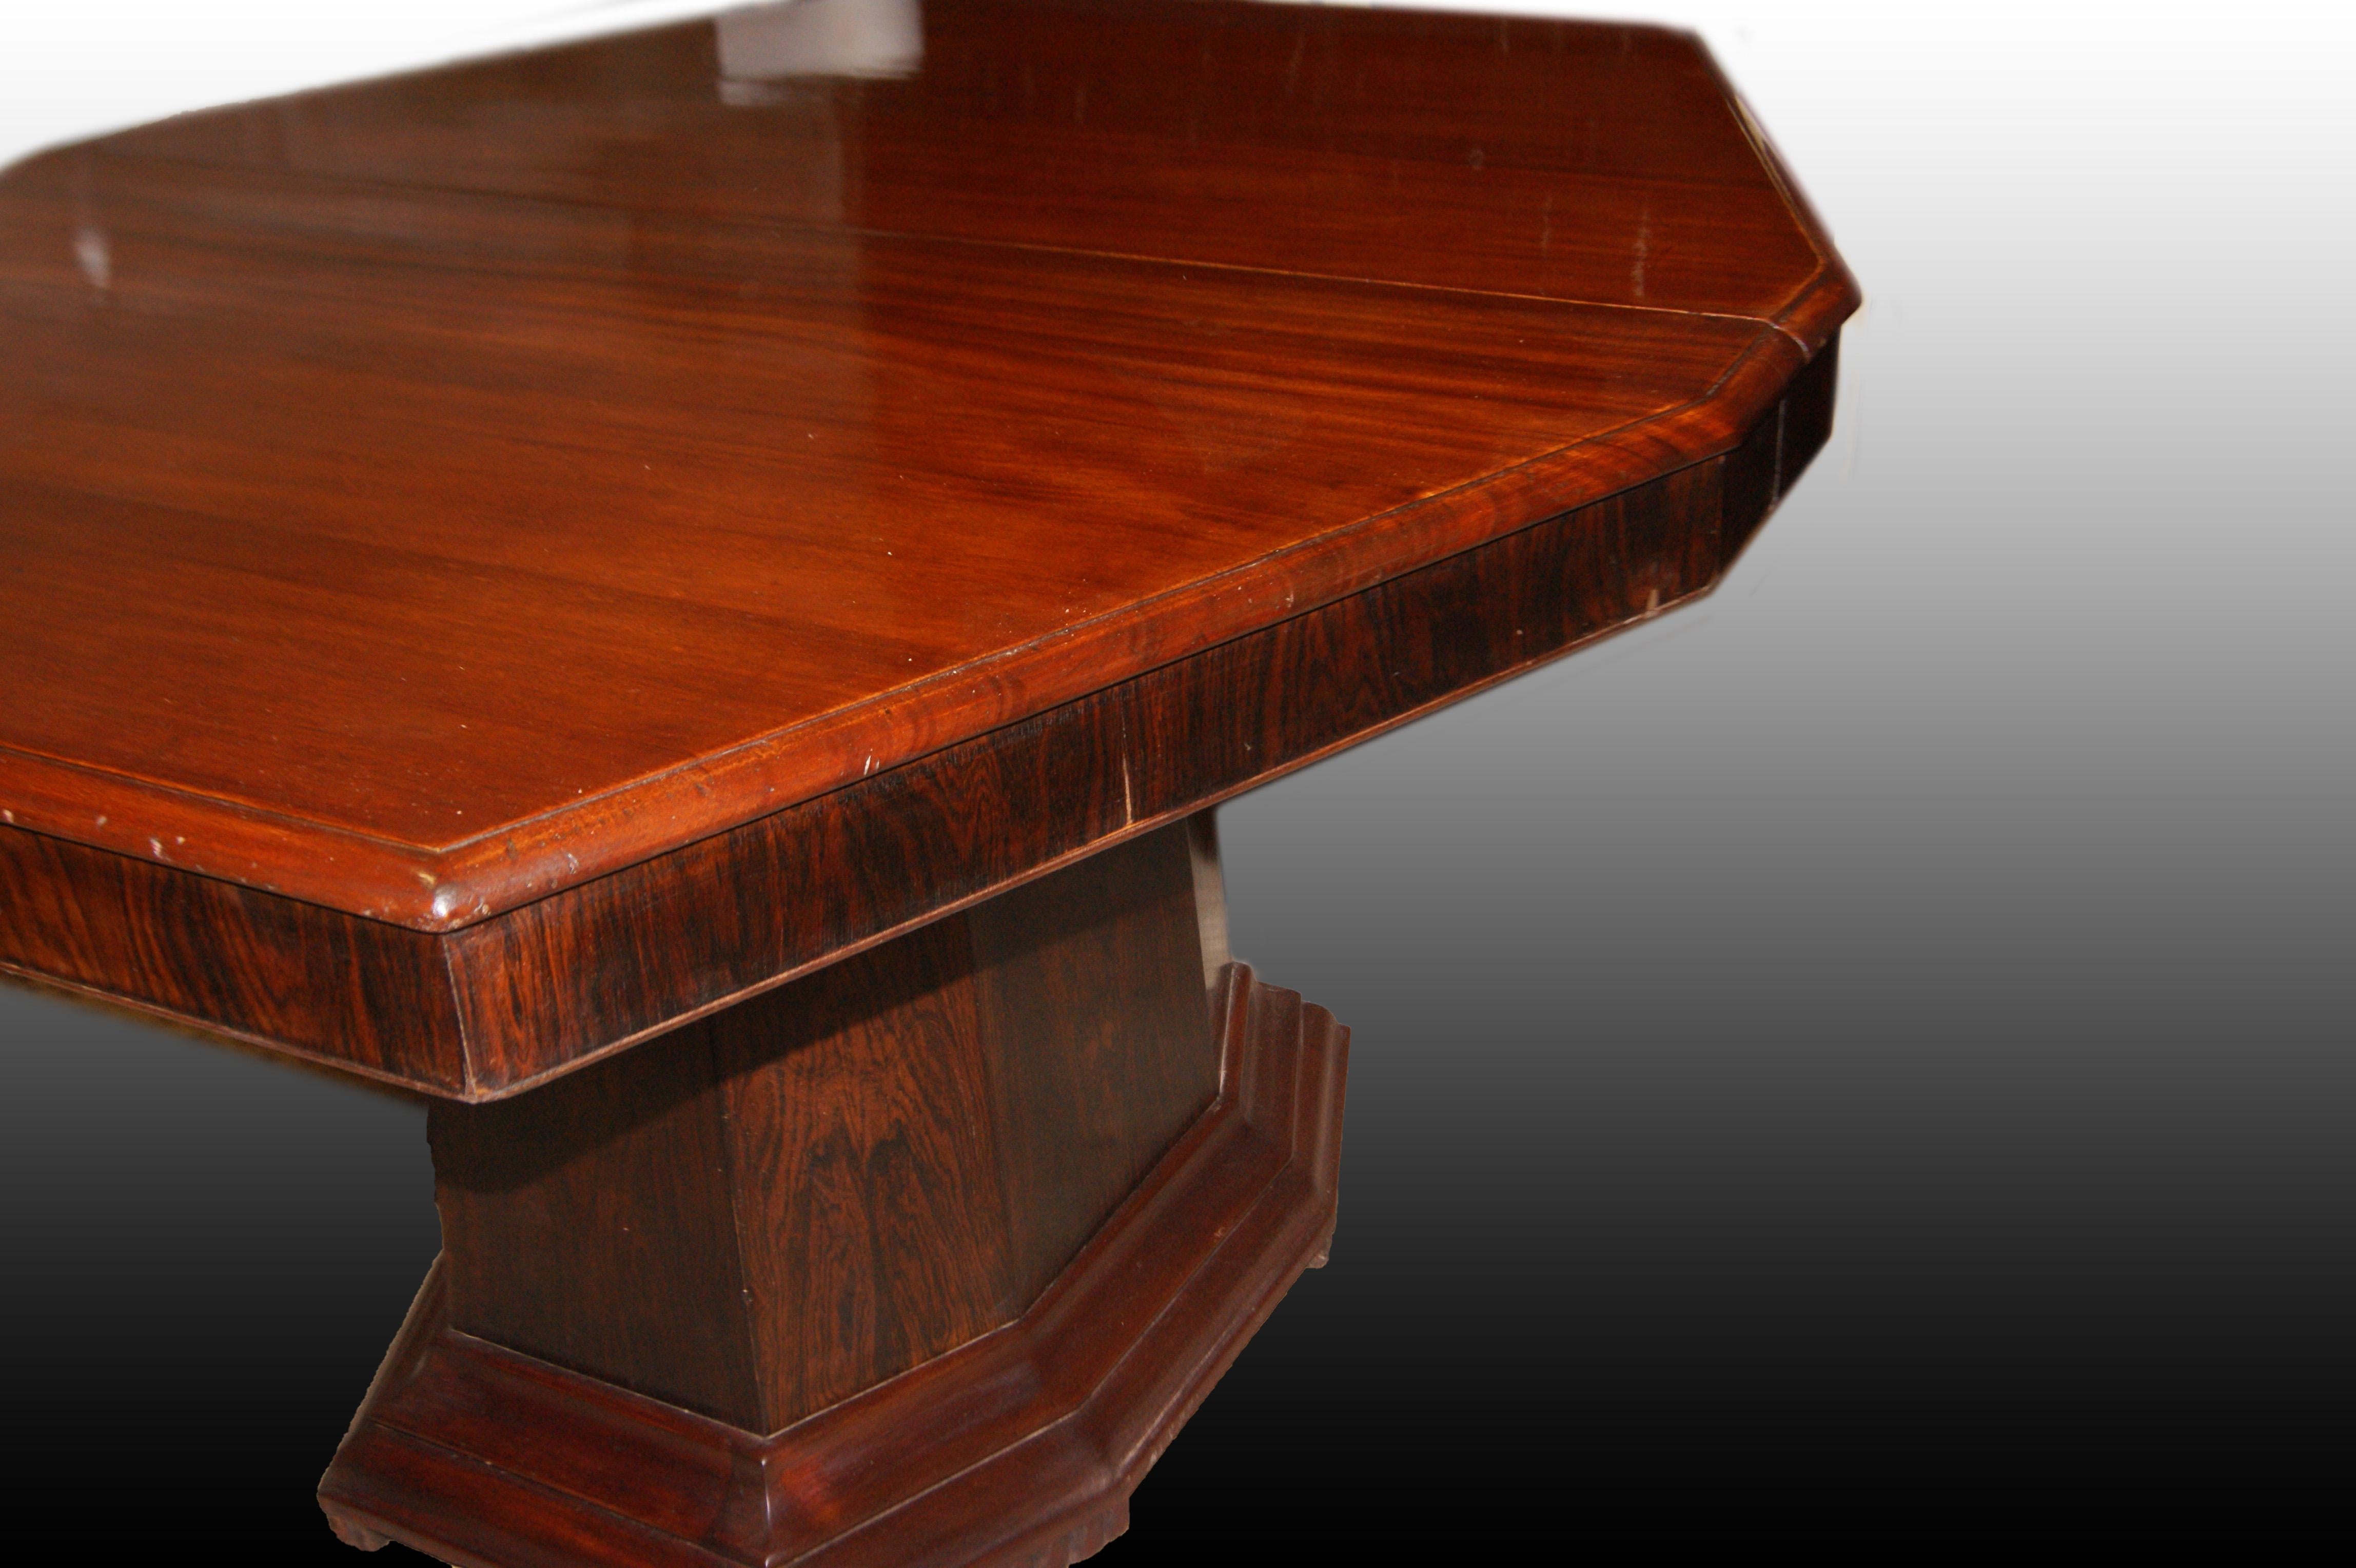 Stunning French extendable table from the early 1900s, in Art Deco style, made of mahogany wood and ebony burl. It features a solid mahogany hexagonal top with a central stump base and an ebony burl sub-top band.

Restored

Price includes